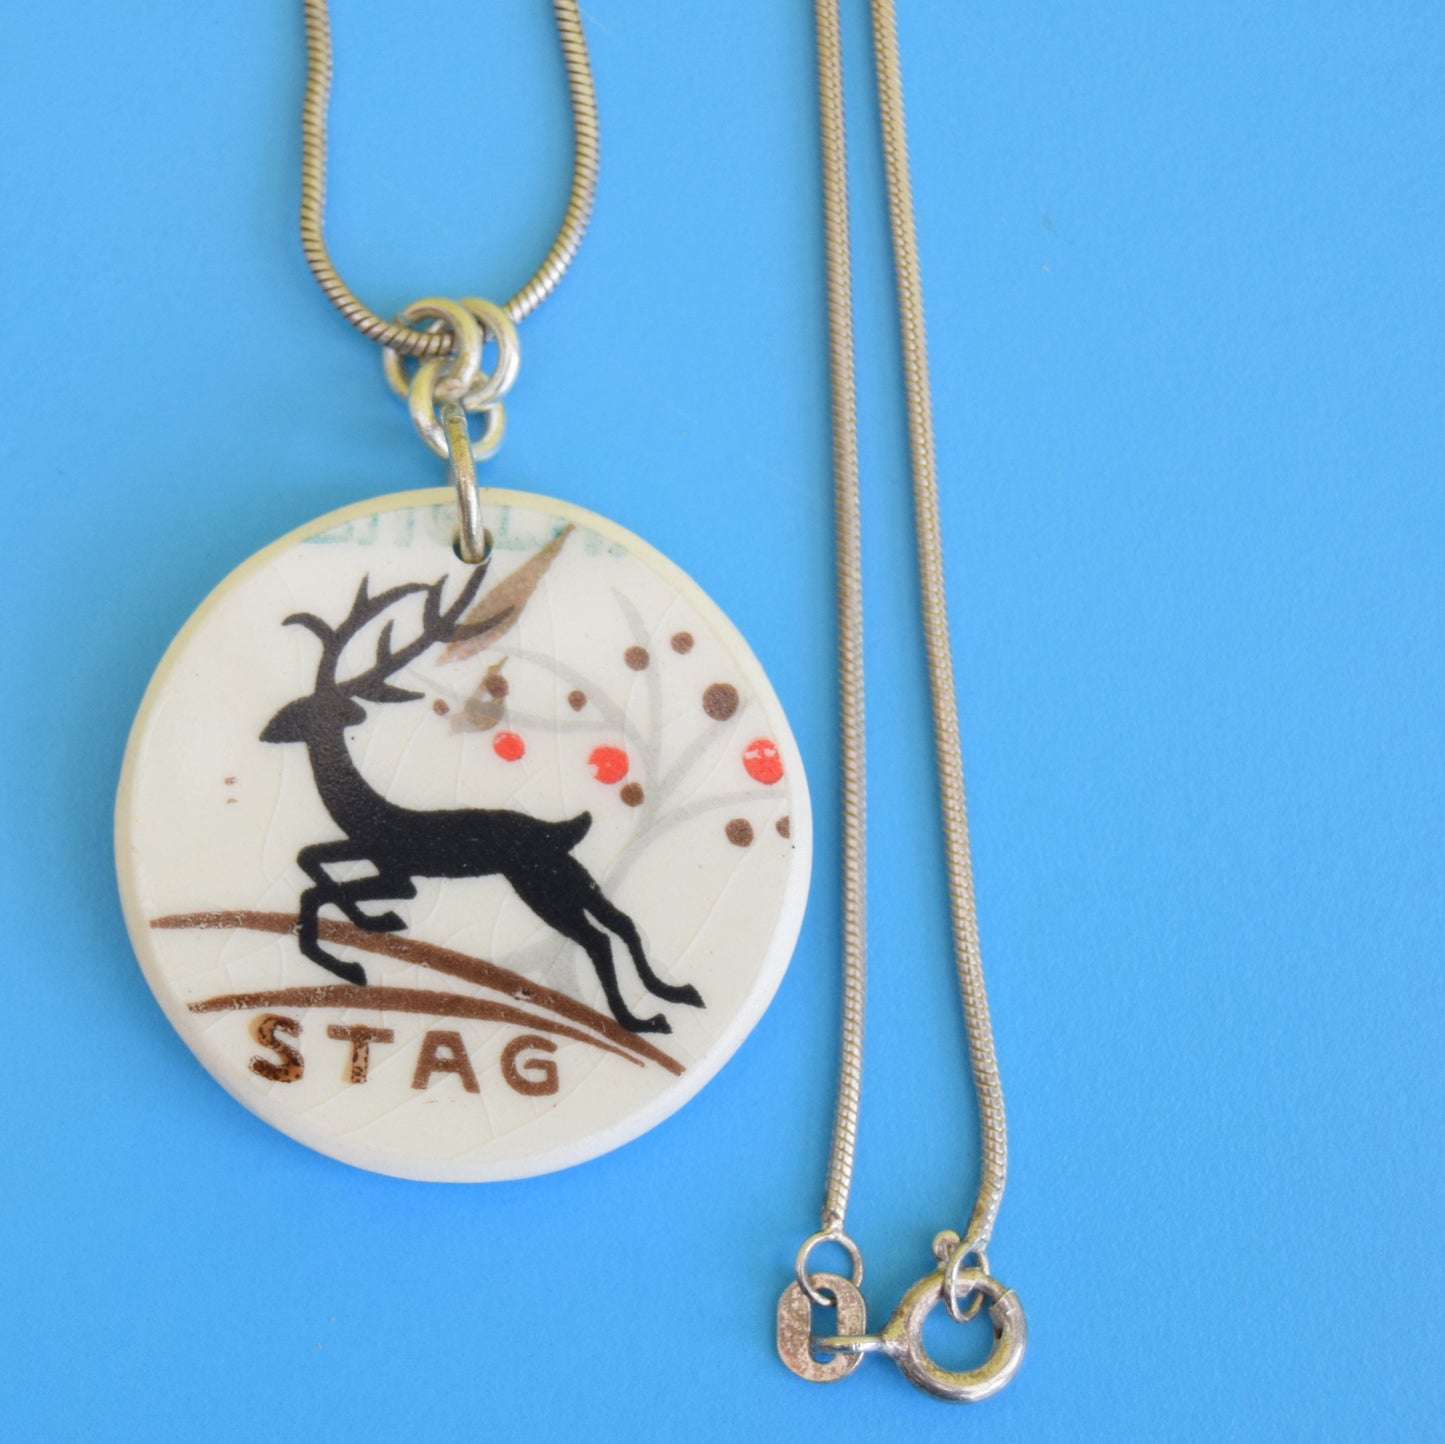 Vintage 1950s Alfred Meakin Shard Necklace / Ring - Stag